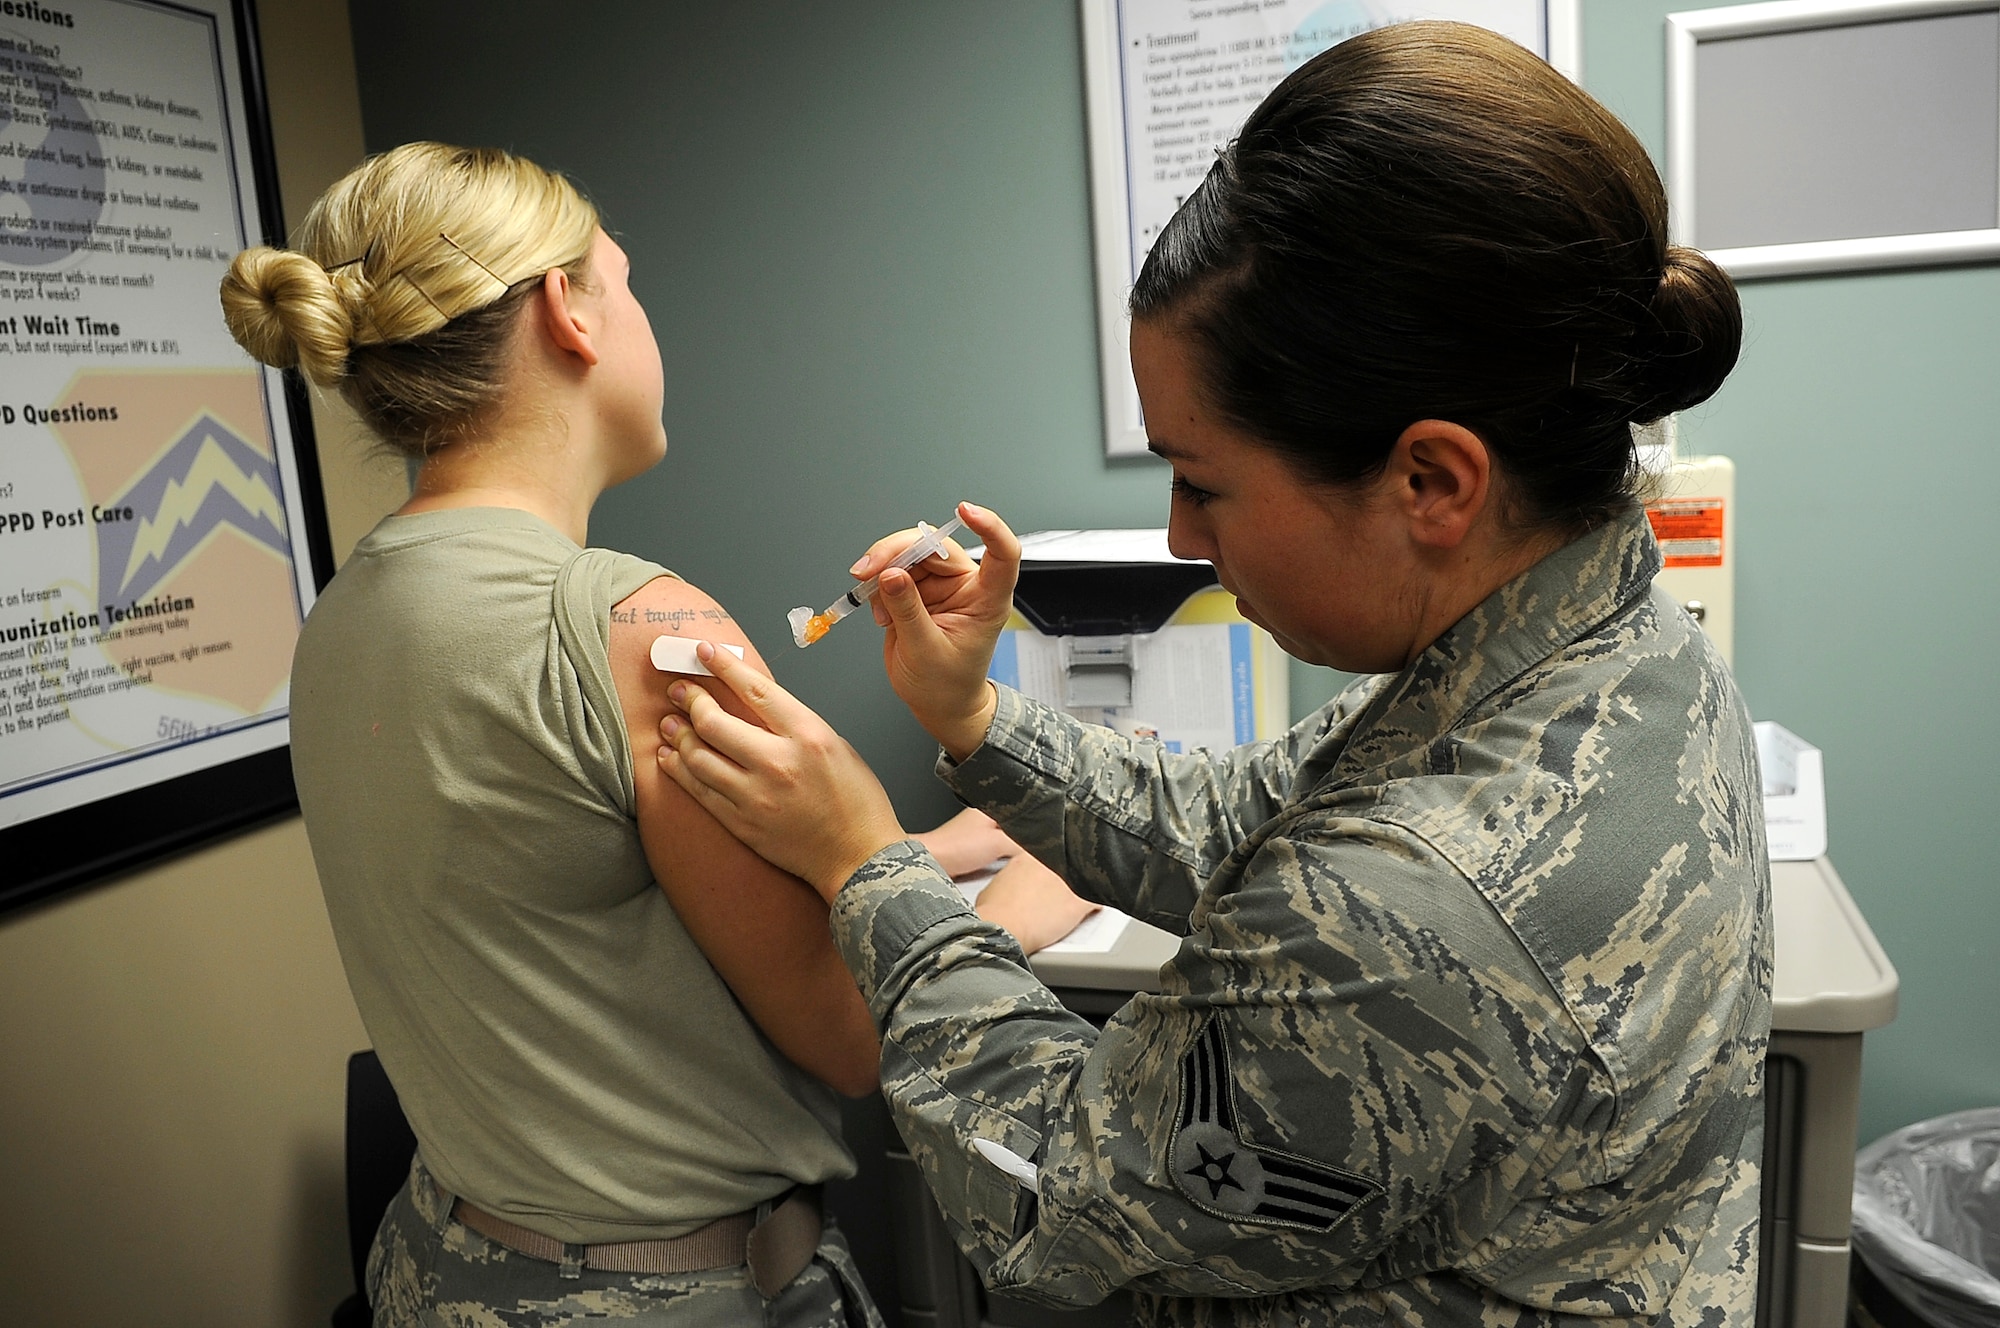 Staff Sgt. Miranda Pyles, 56th Medical Operations Squadron allergy and immunization technician, receives a third dose of the papilloma vaccine Jan. 14 from Senior Airman Cassandra Saunders, 56th MDOS allergy and immunization technician, at Luke Air Force Base. The allergy and immunization clinic also administers allergy tests. (U.S. Air Force photo/Airman Pedro Mota)